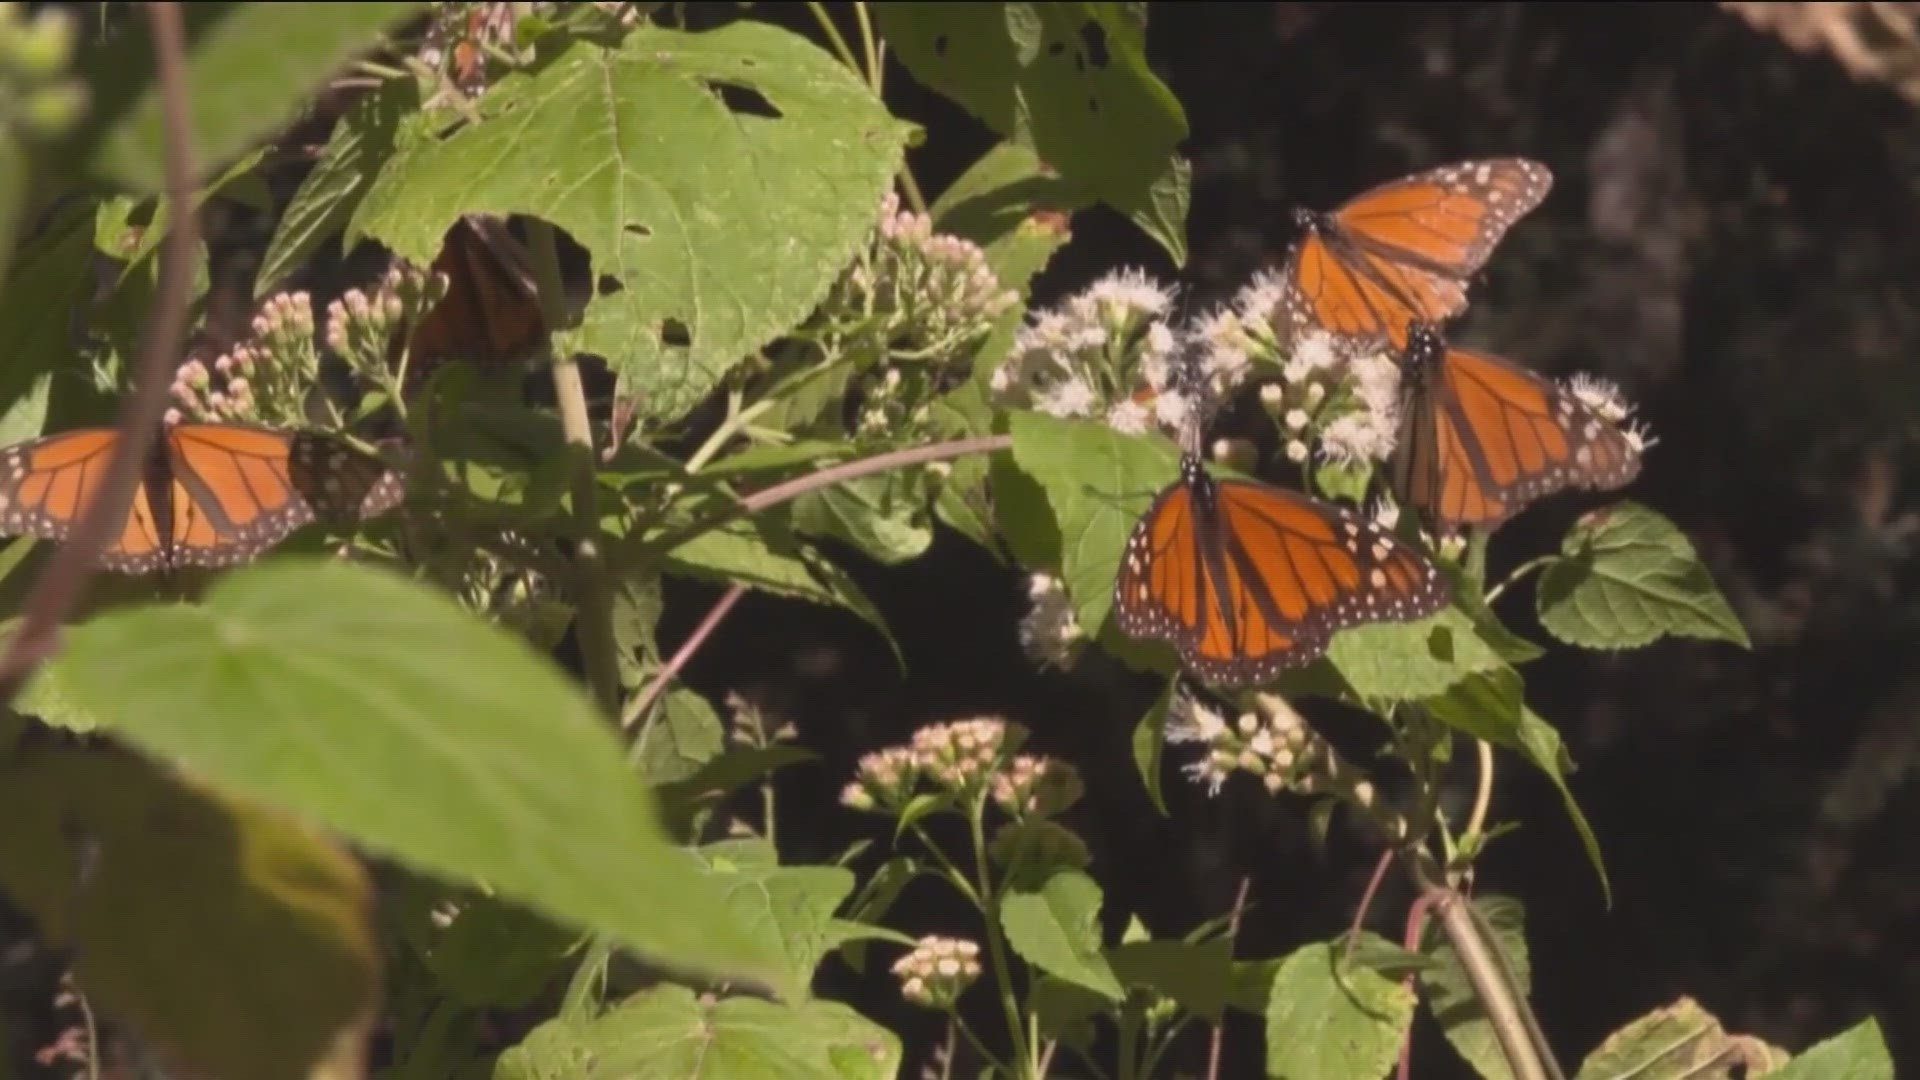 There's been a dramatic decline in the monarch butterfly population along the West Coast in recent years.